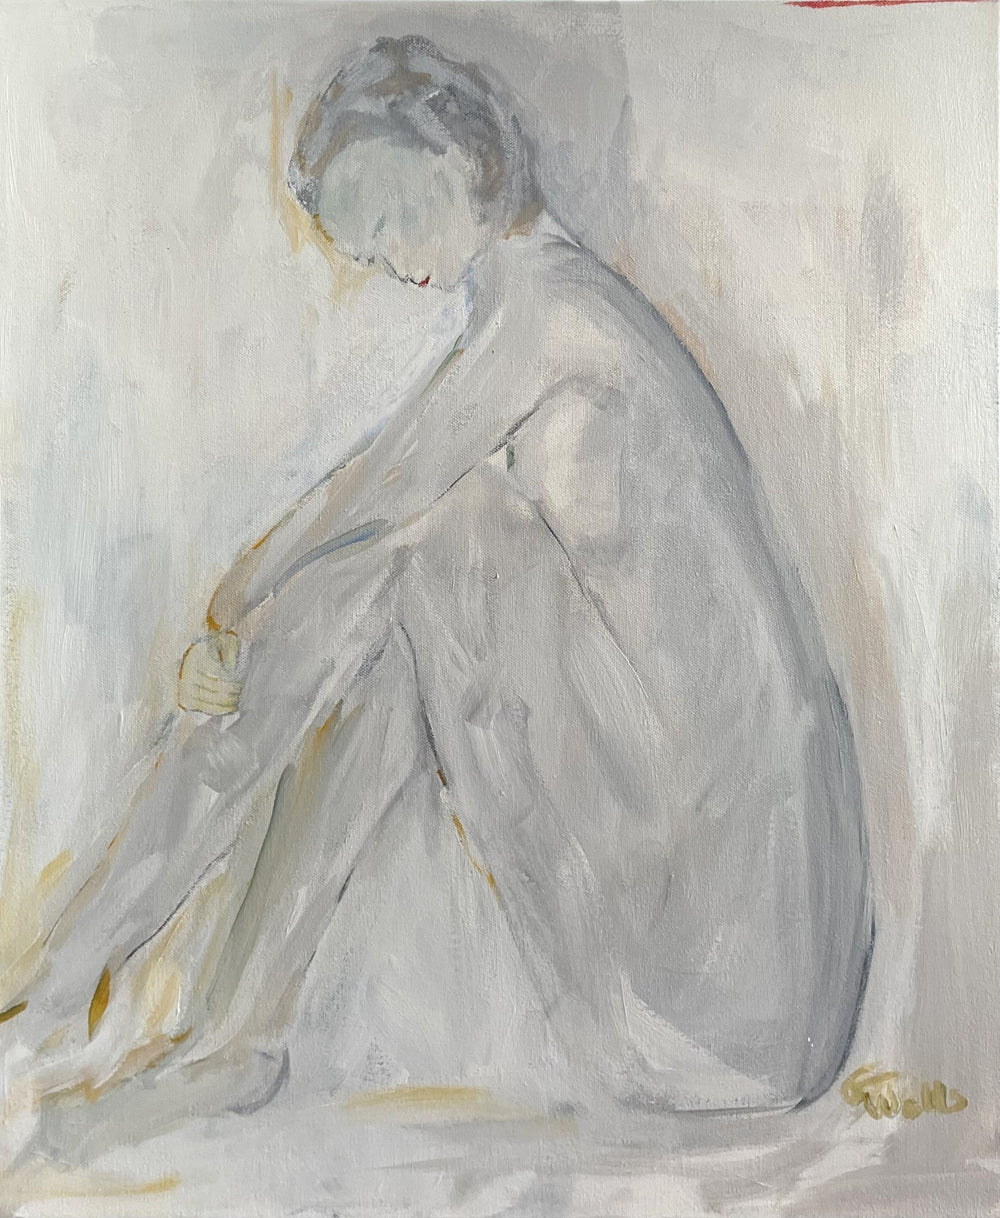 Acrylic on canvas abstract painting of female figure sitting with her knees to her chest. The colors are light creams and greys titled In Thought - Artly International